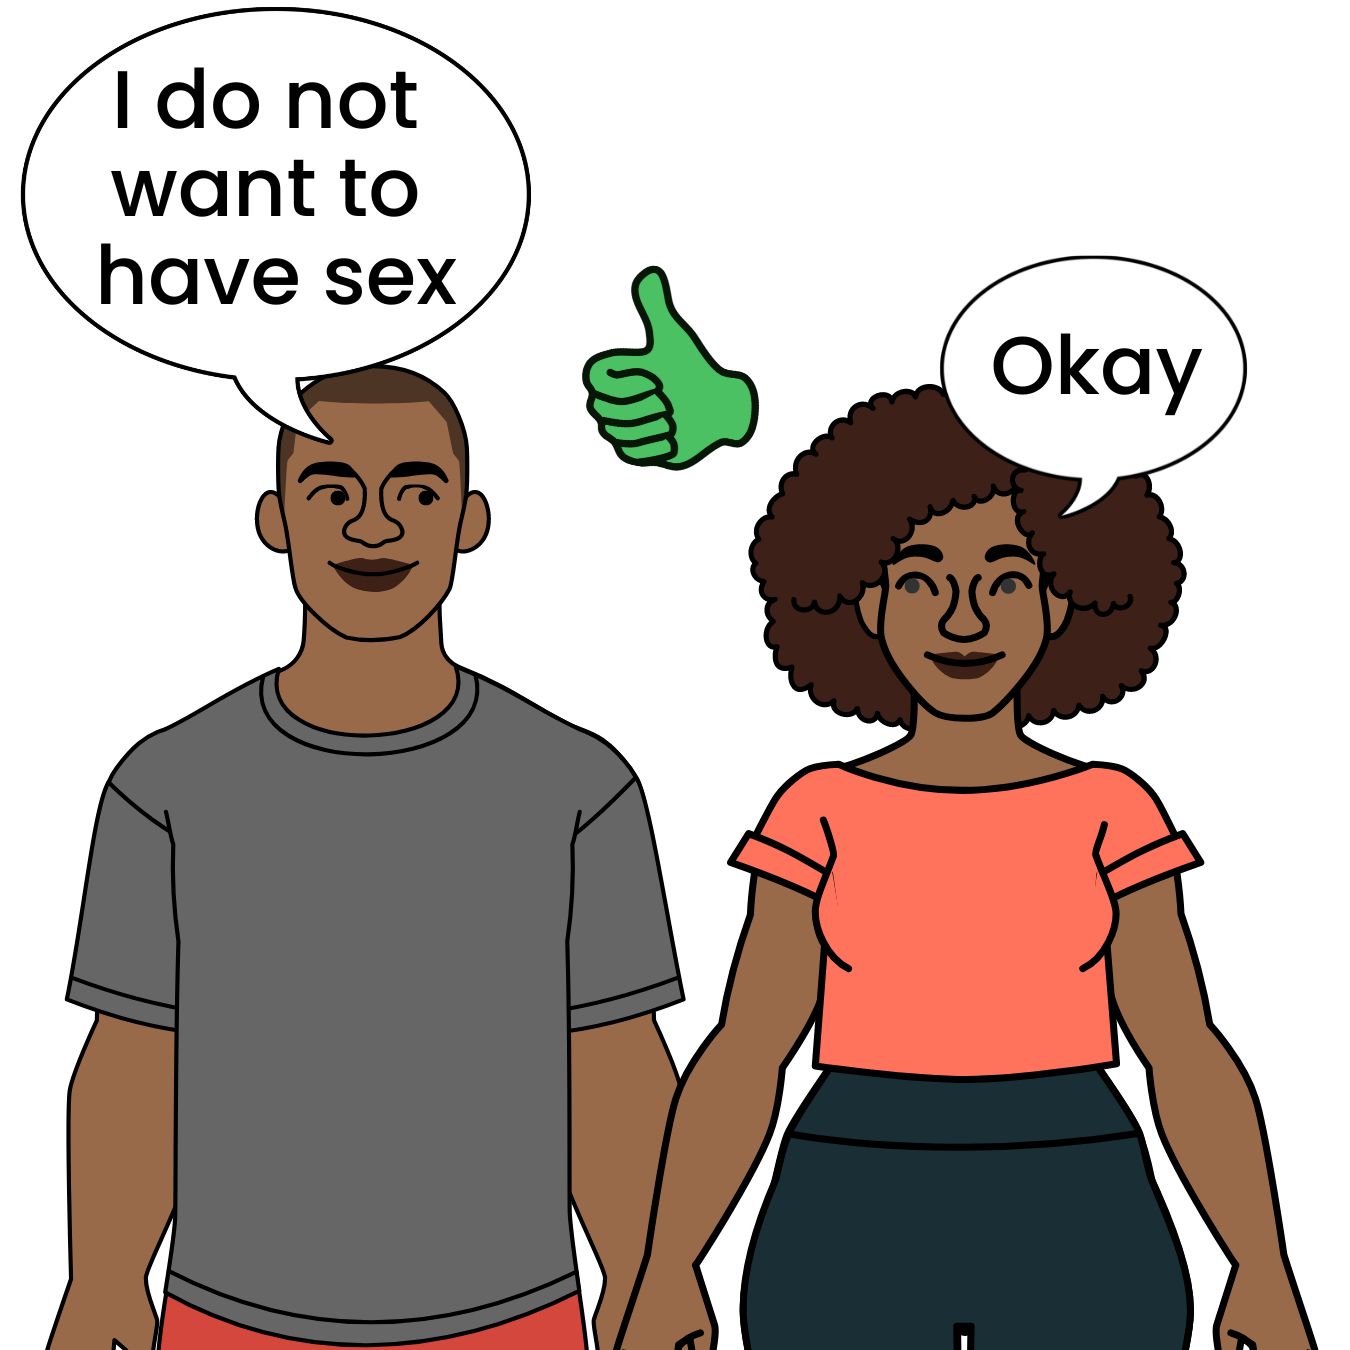 Image of a couple changing their mind about having sex.